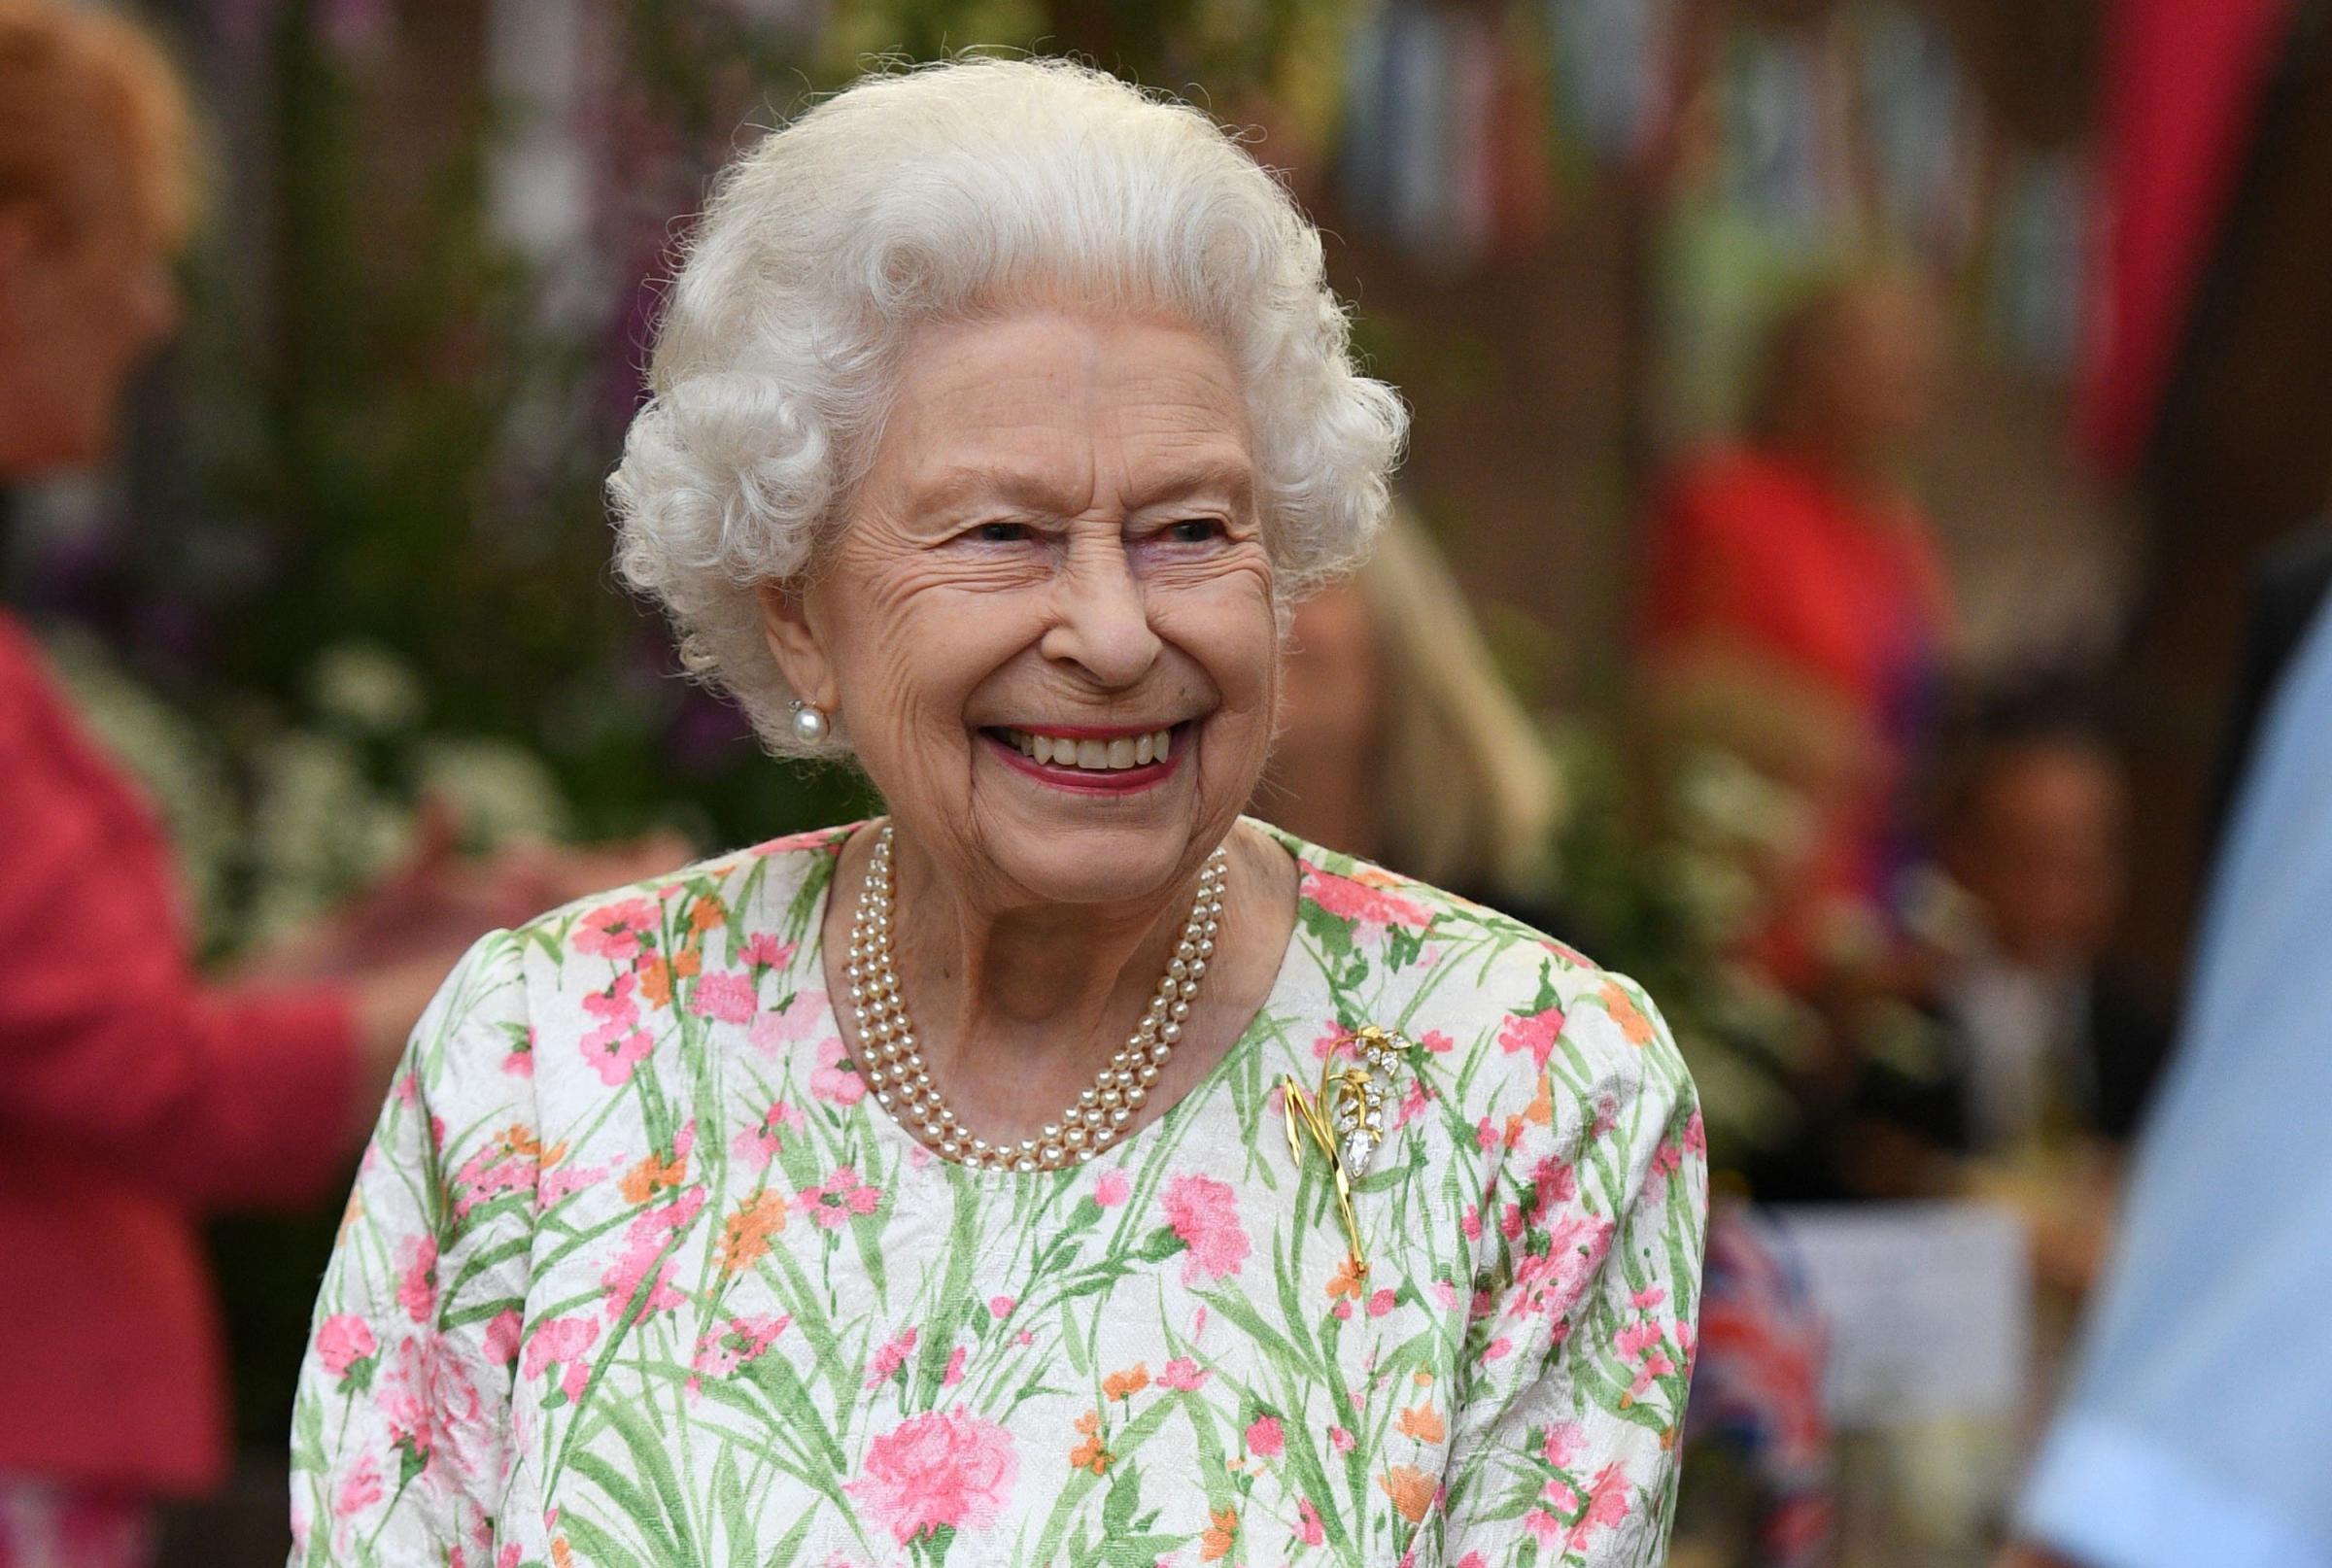 The Queen wore floral to the Eden Project in Cornwall last year during the G7 Summit Picture: PA